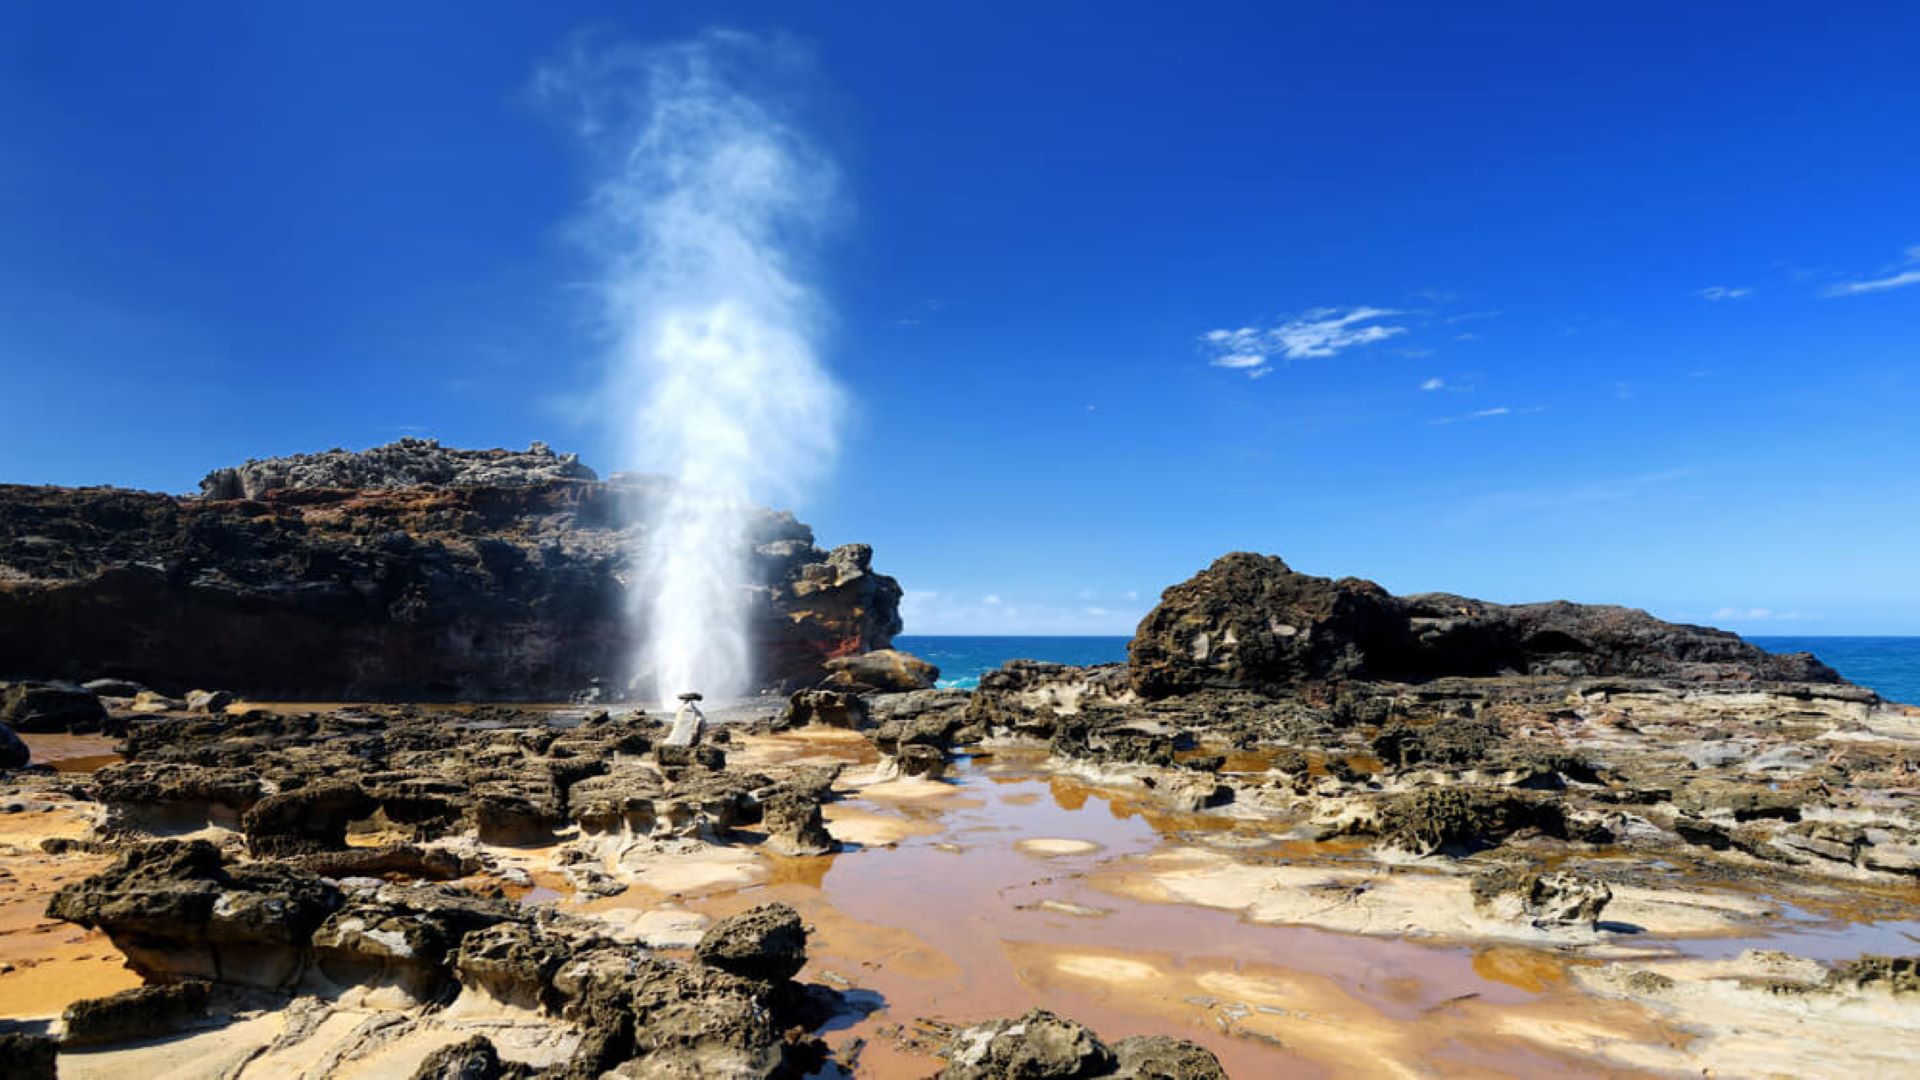 A view of the Nakalele Blowhole erupting at Nakalele Point